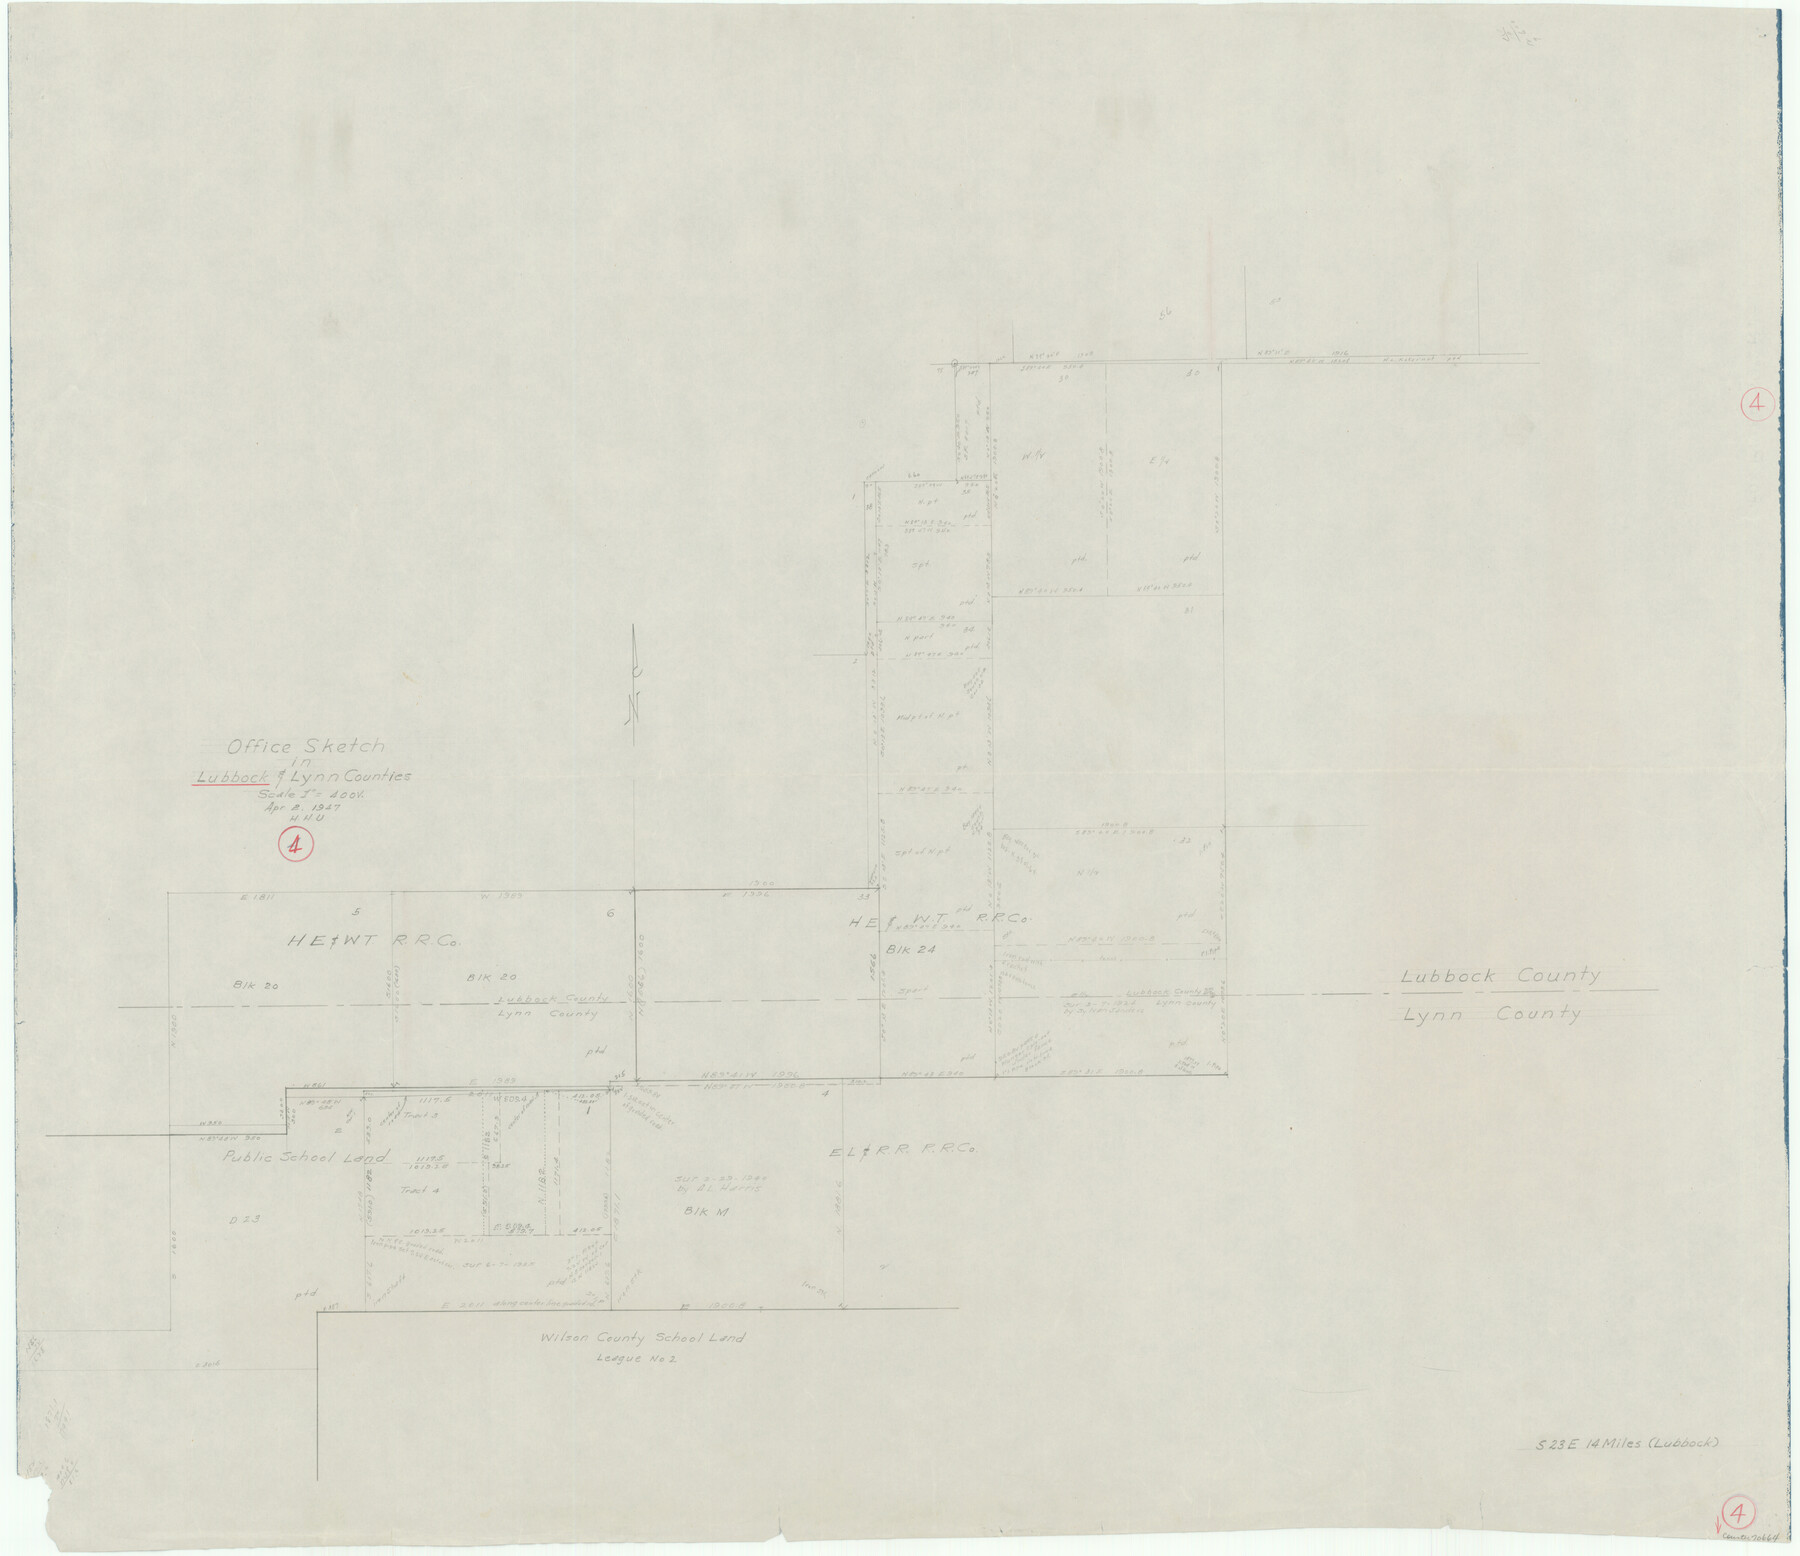 70664, Lubbock County Working Sketch 4, General Map Collection